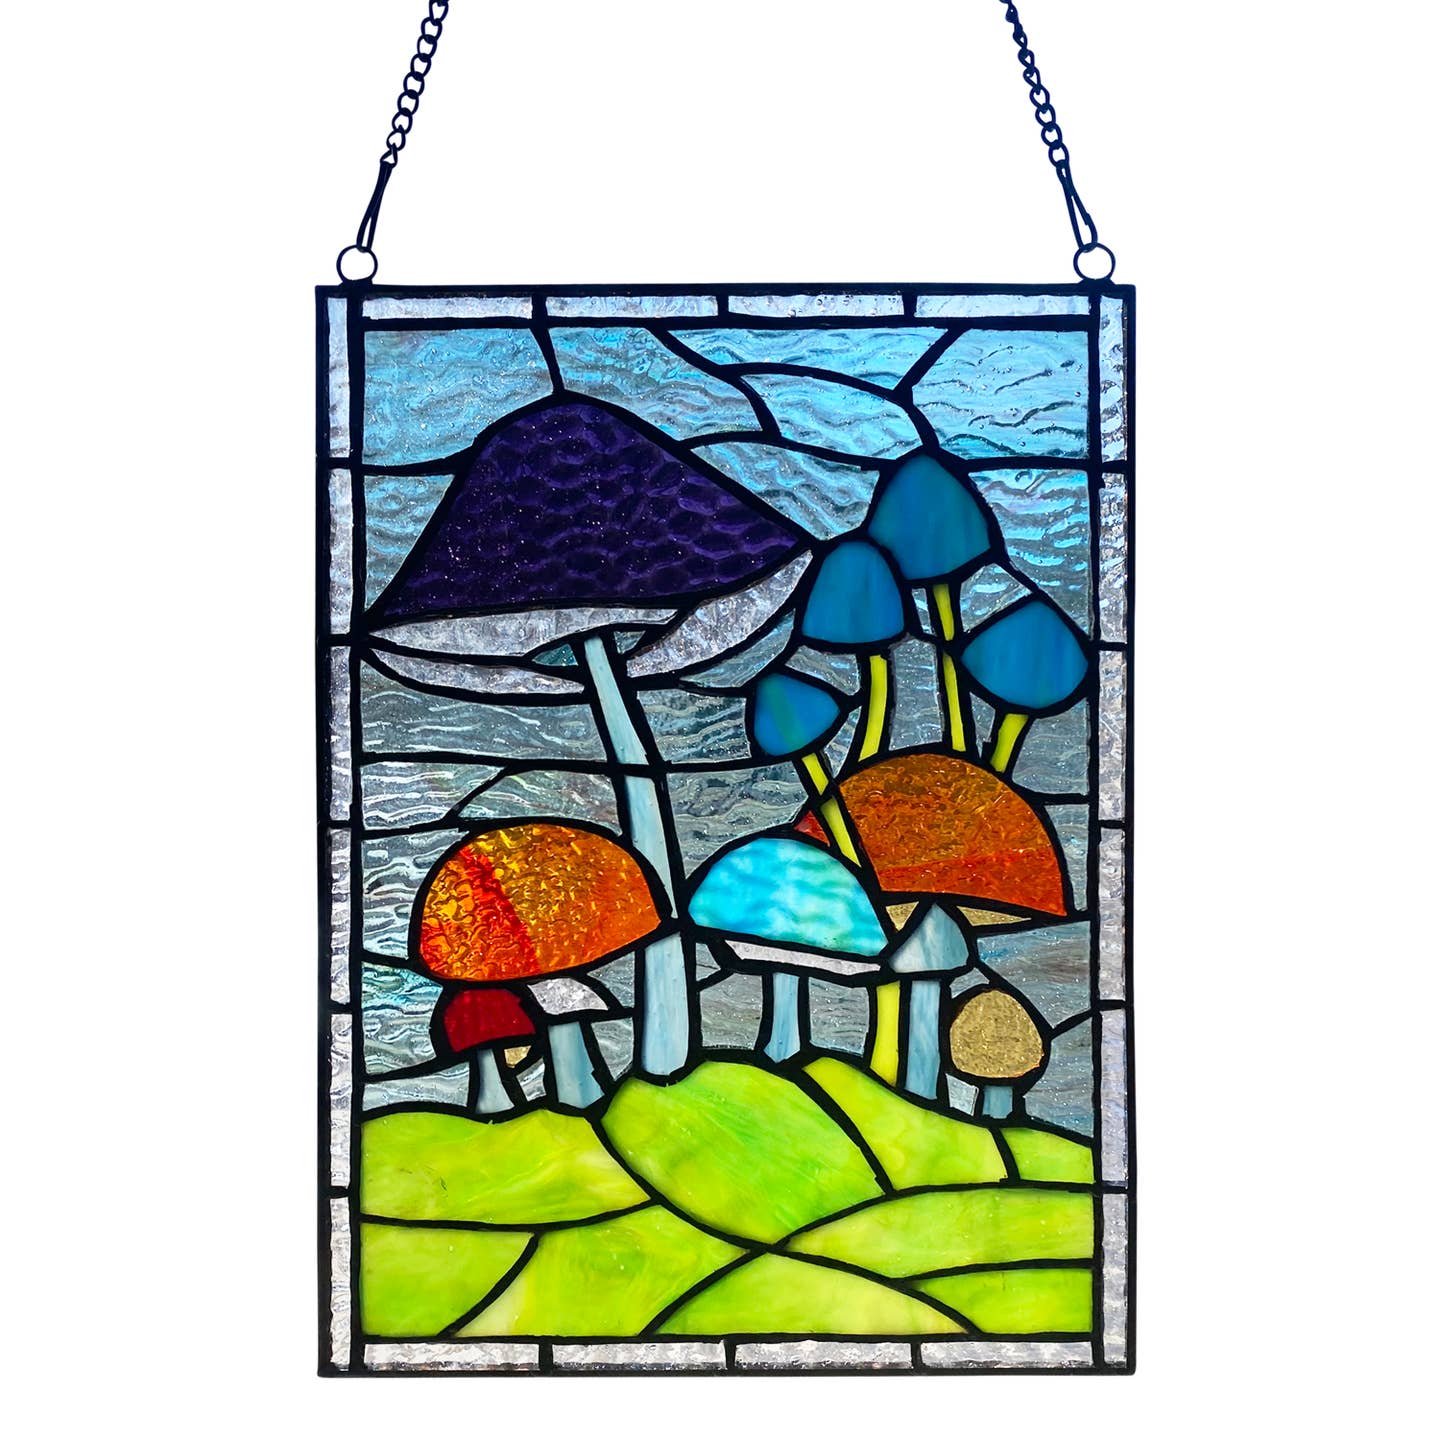 Erin Green Mushrooms Stained Glass Window Panel 11 1/2" H